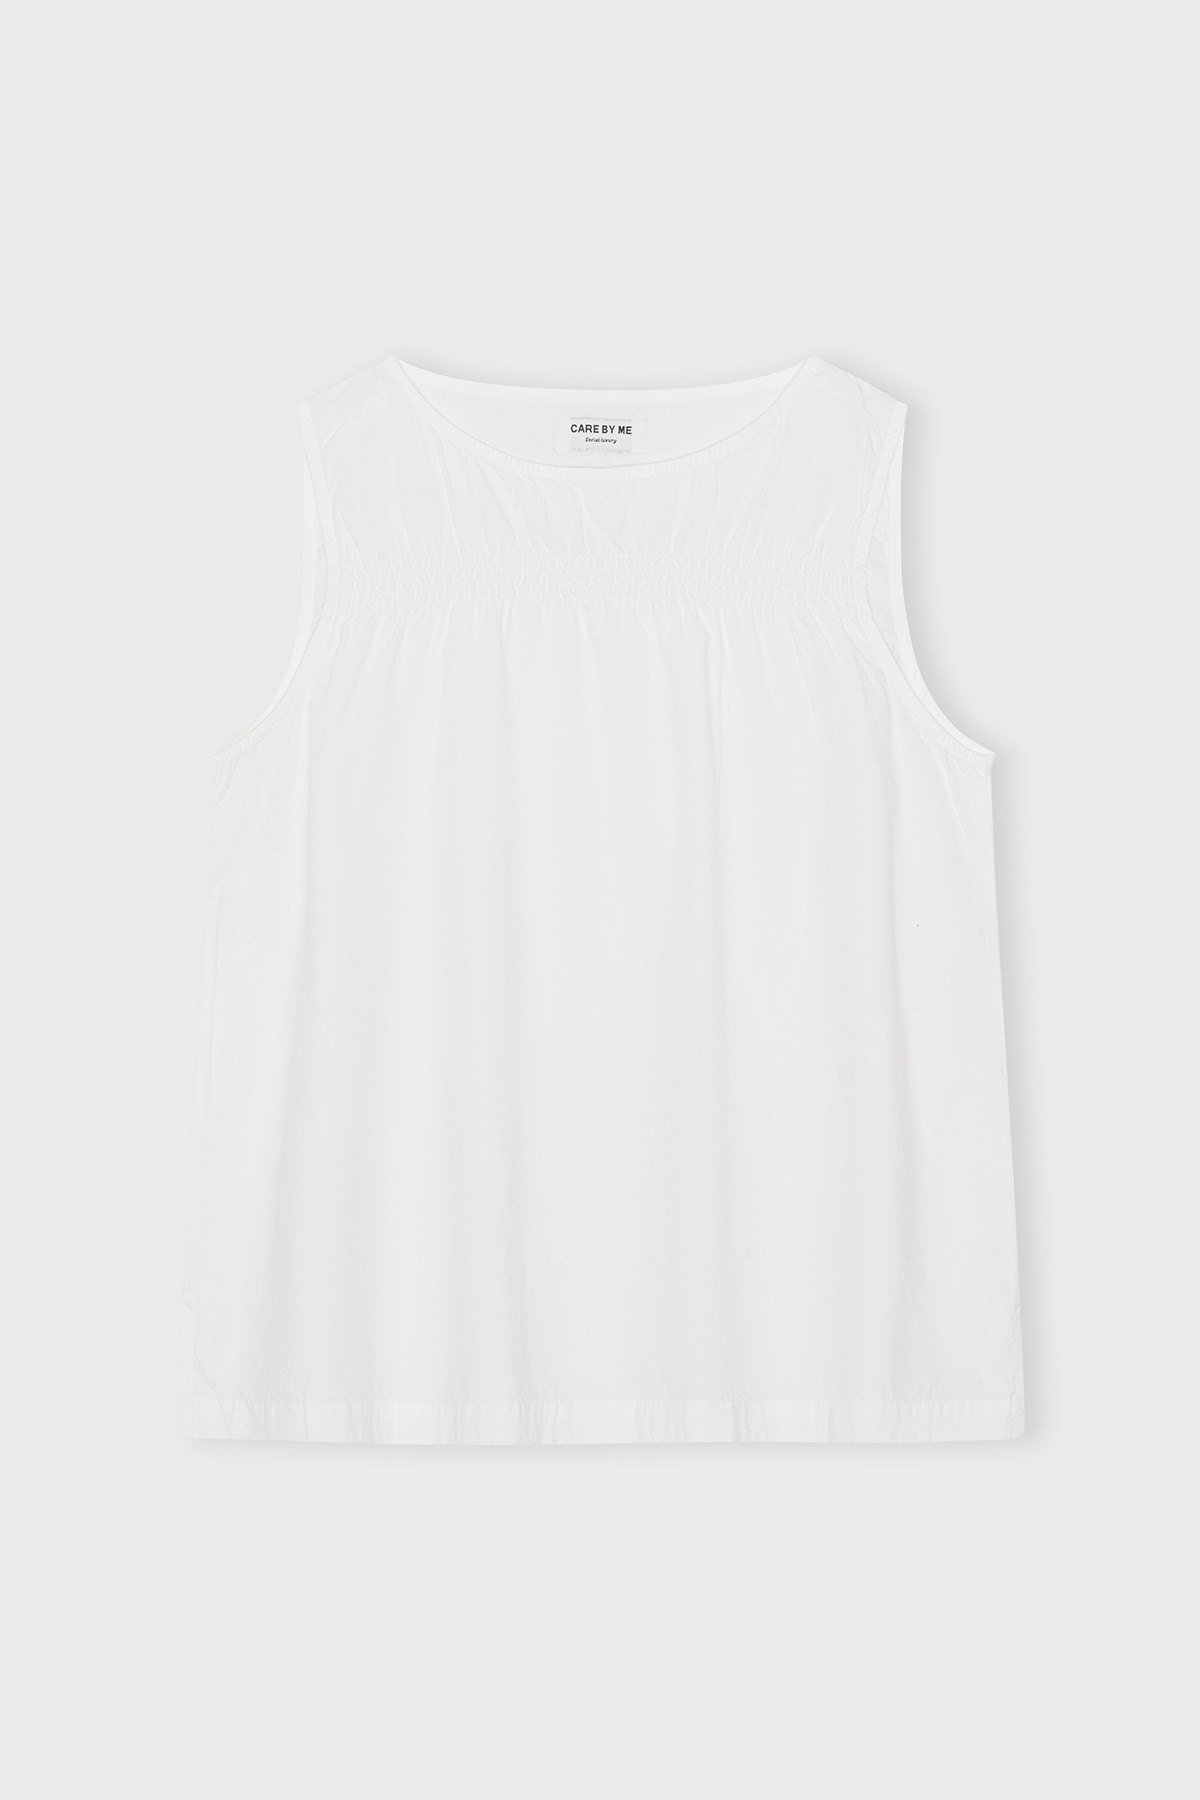 Top “Laura Bell” fra Care By Me – Pure White